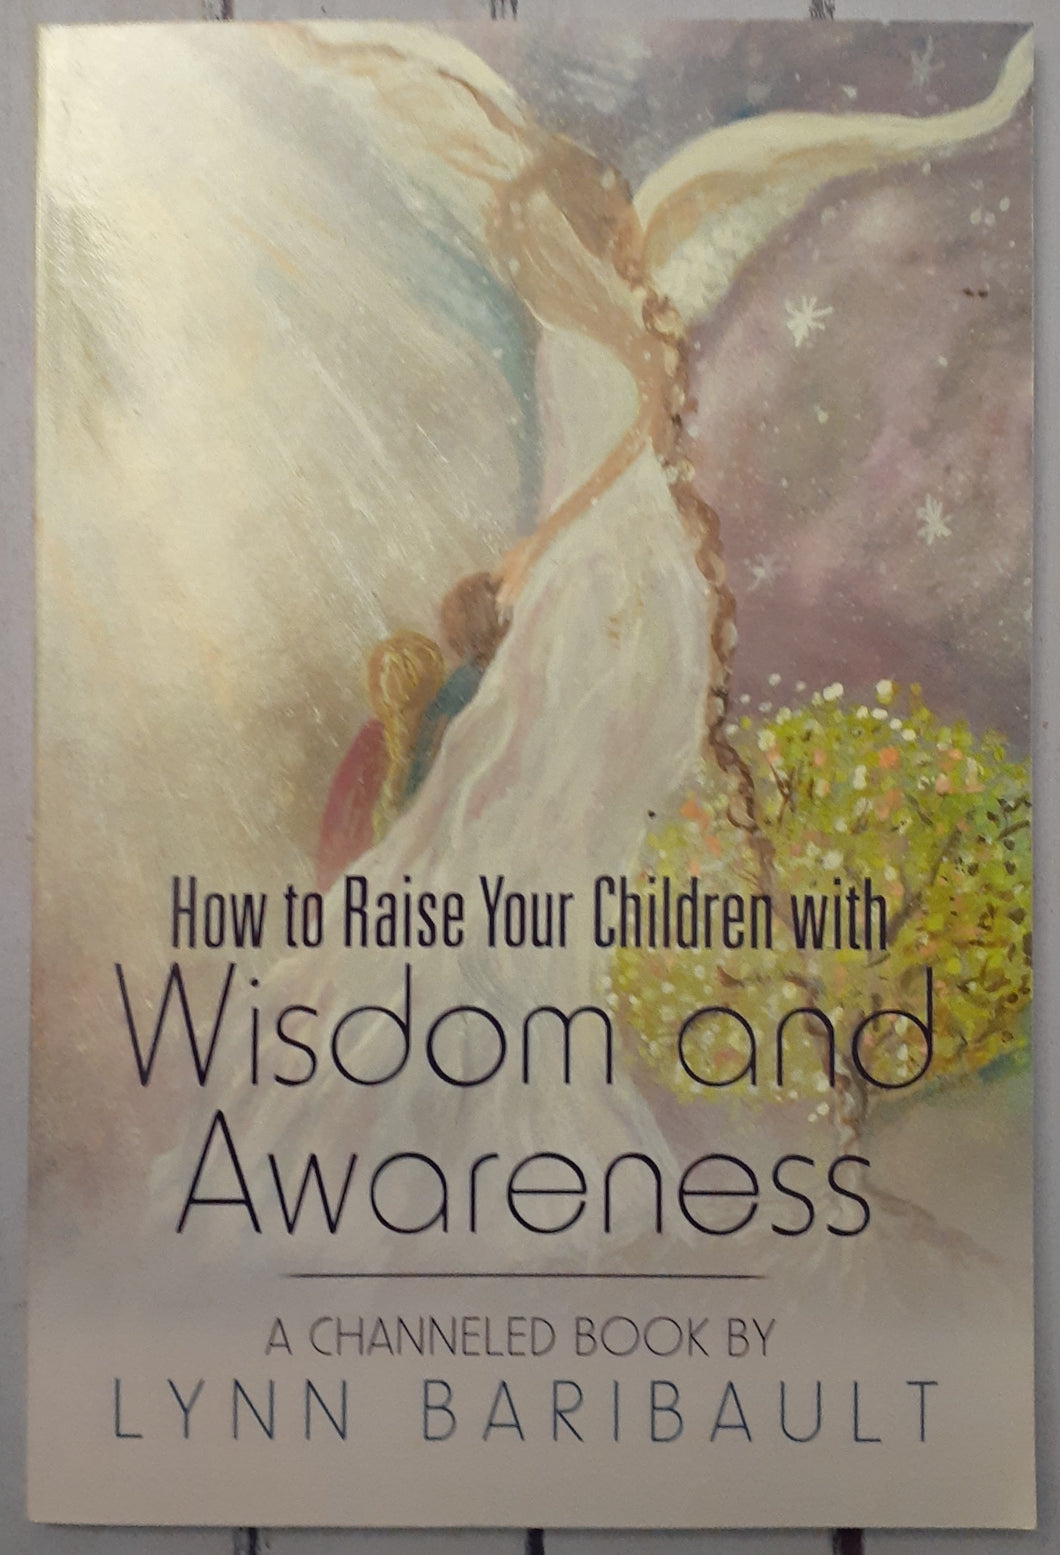 How to Raise Your Children with Wisdom and Awareness: A Channeled Book by Lynn Baribault